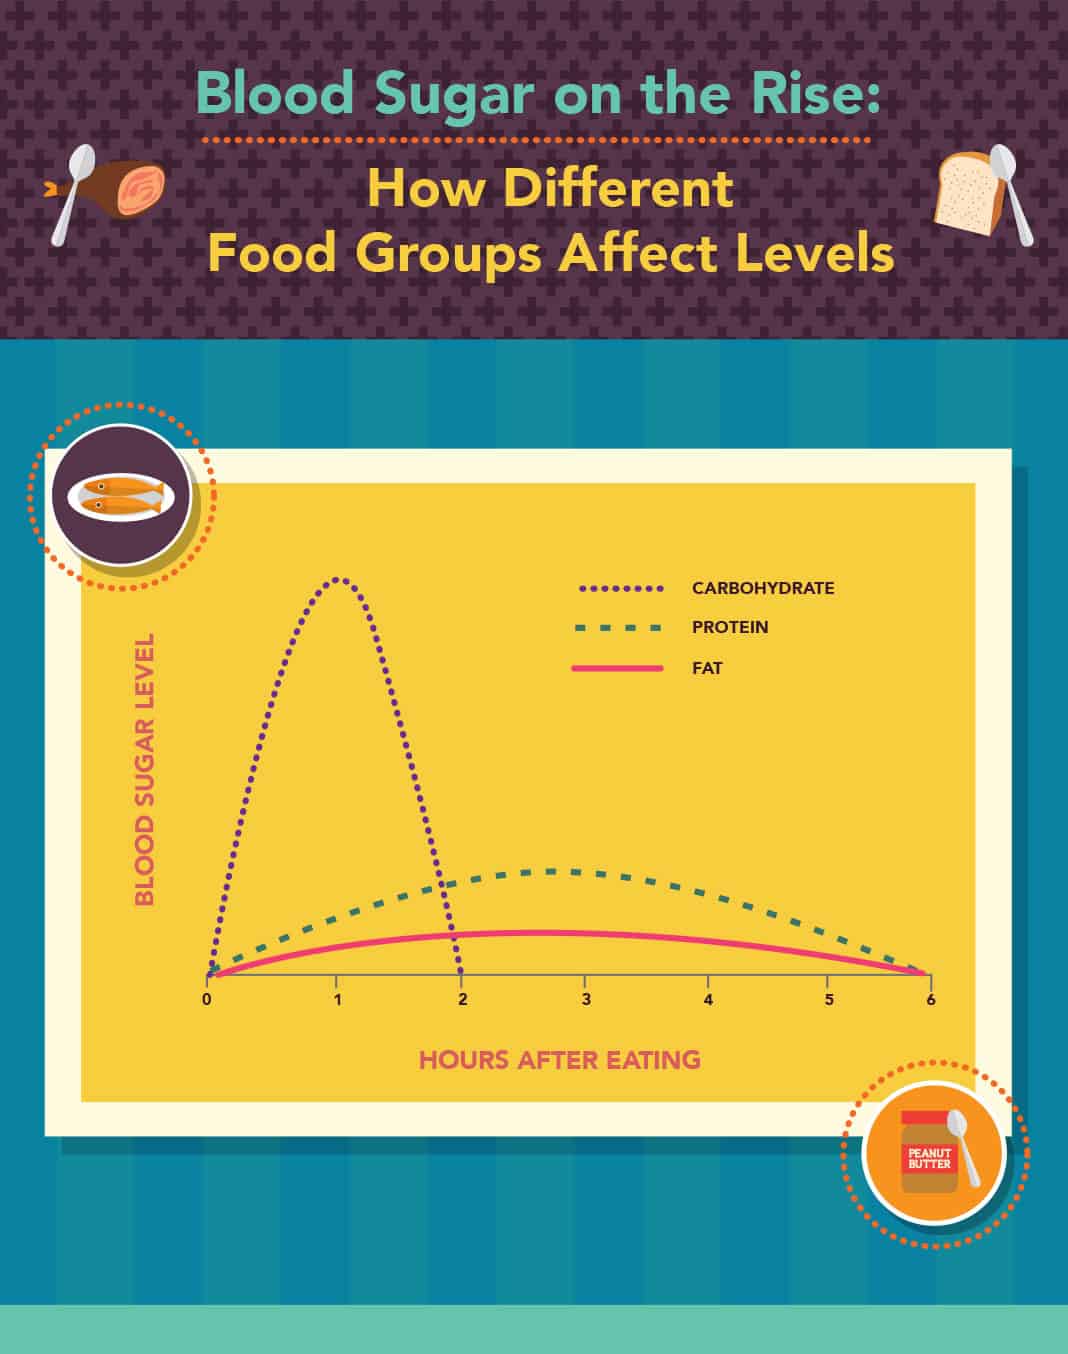 How Different Food Groups Affect Levels